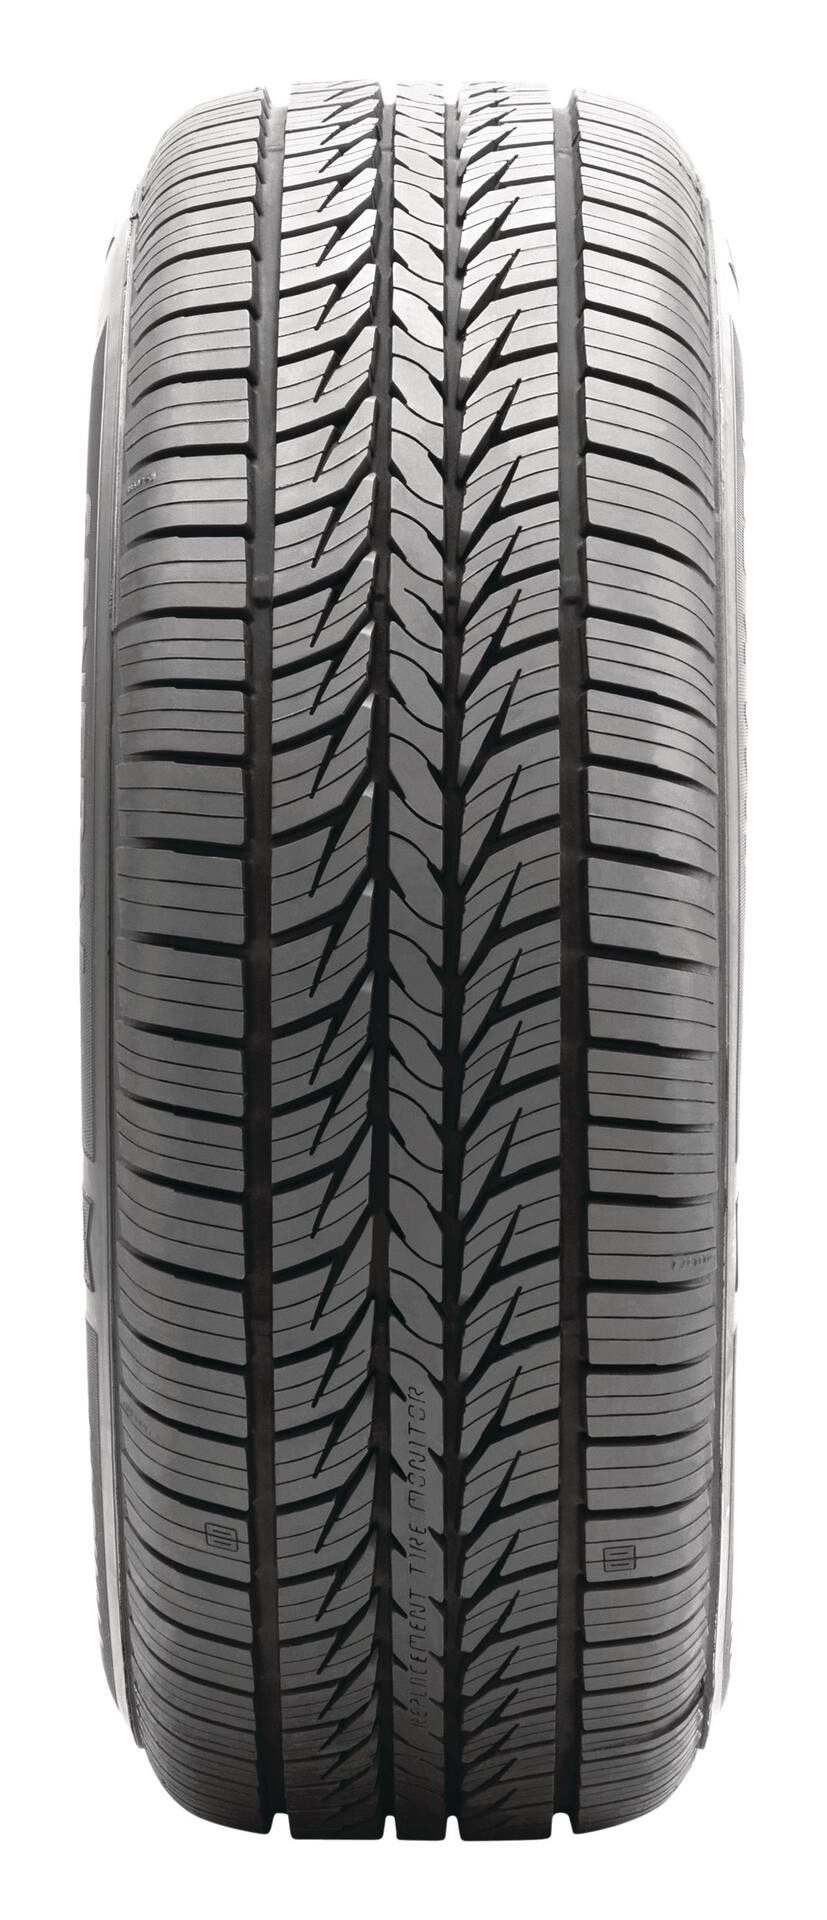 General Tire Altimax RT43 All Season Tire For Passenger & CUV